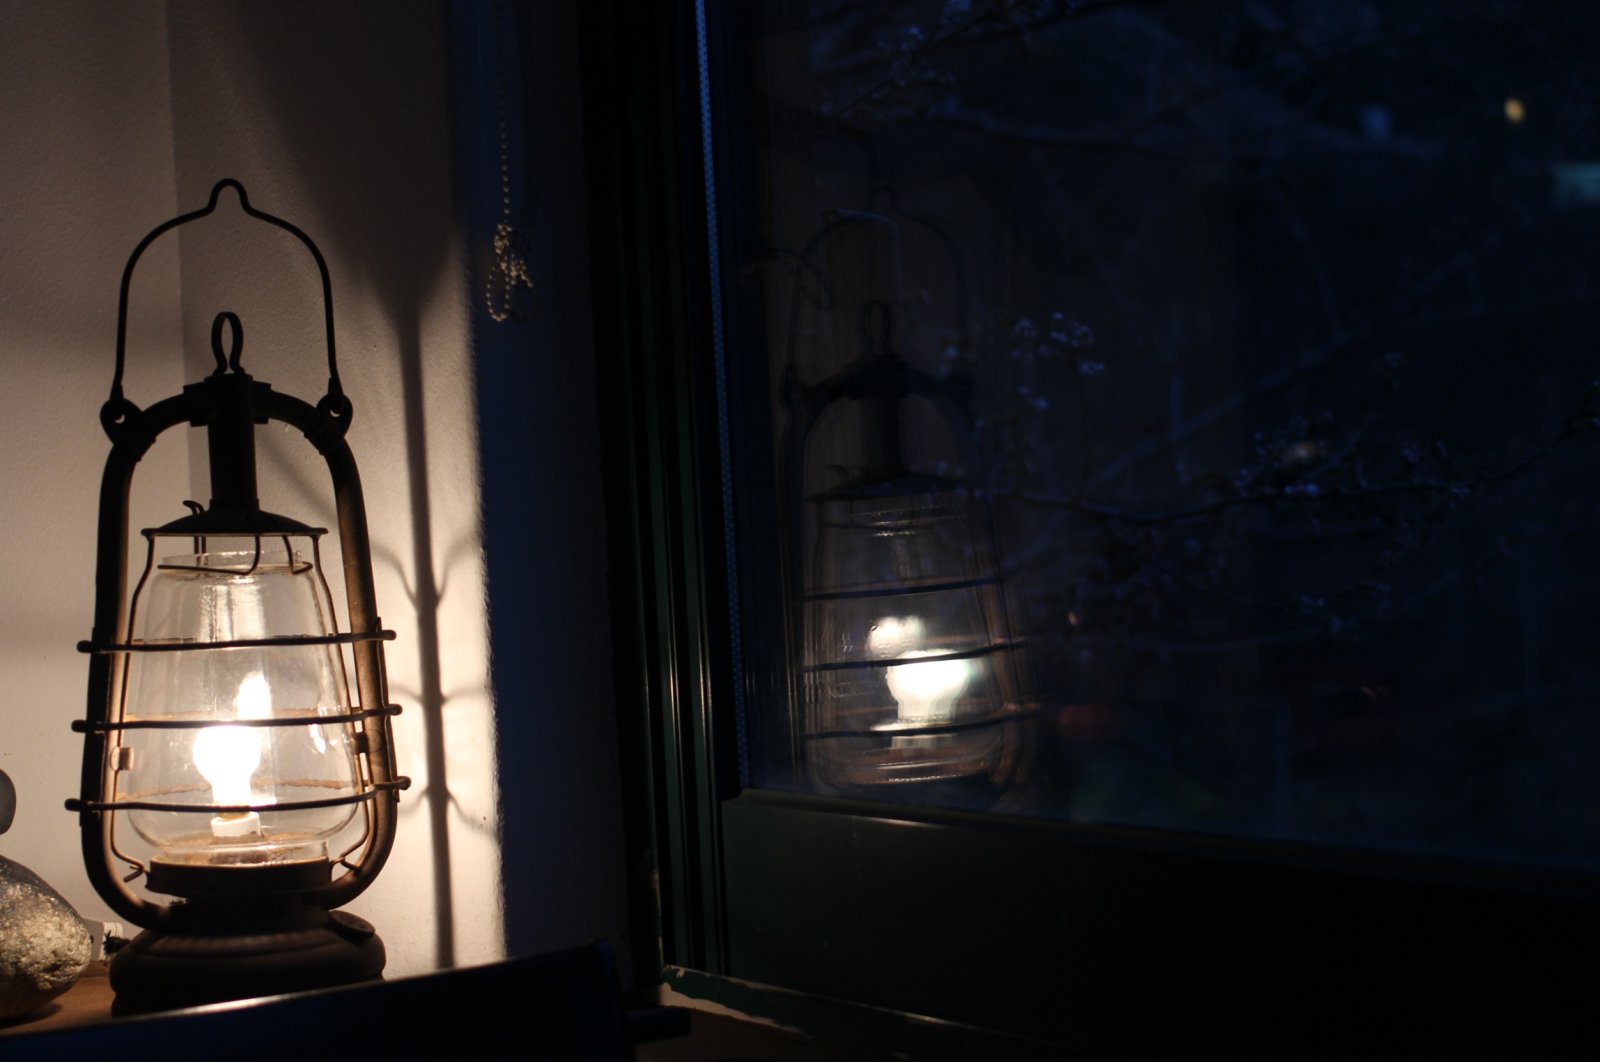 A gaslight lights up a dark room, figuratively representing the opposite of the word&#039;s verb form, which refers to manipulating, grossly misleading, downright deceitful behavior. (Shutterstock Photo)